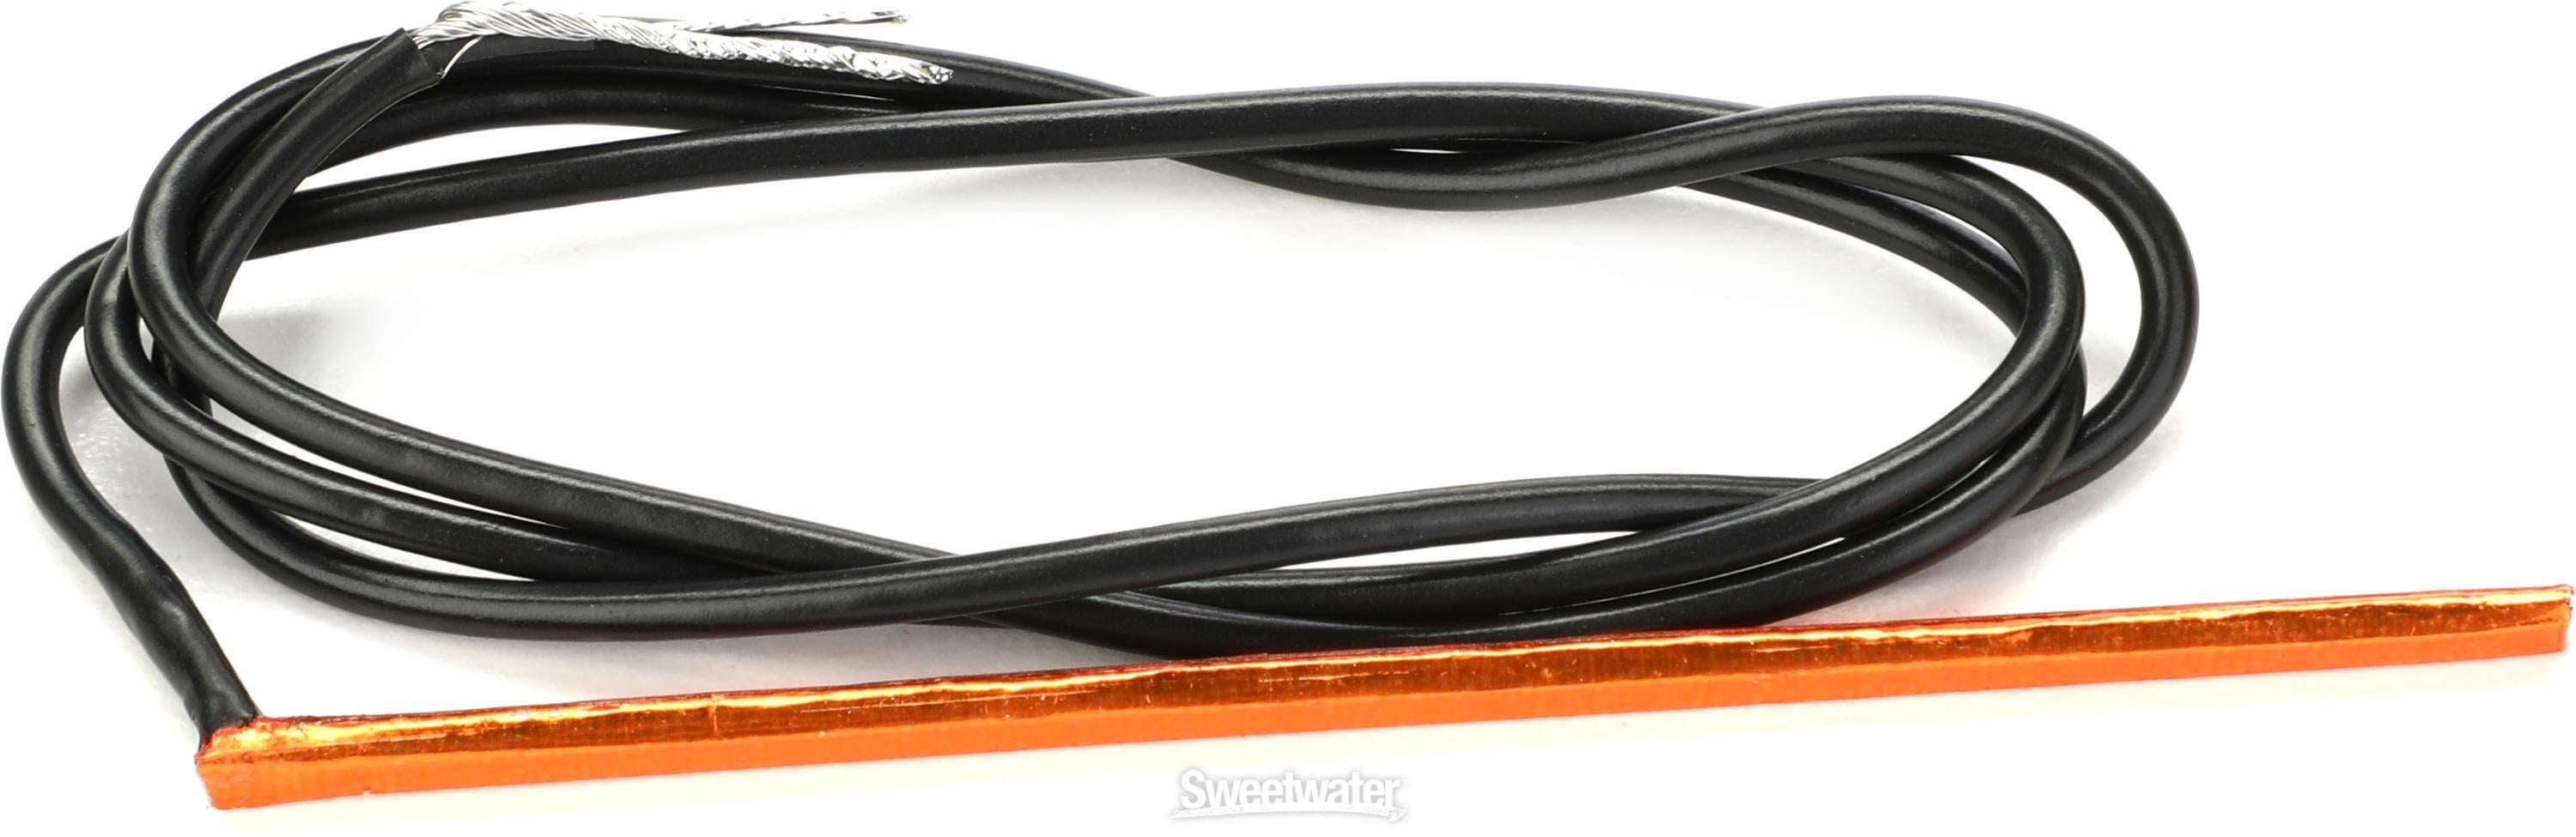 Fishman AG-094 Passive 6-string Acoustic Undersaddle Pickup - Narrow Format  | Sweetwater